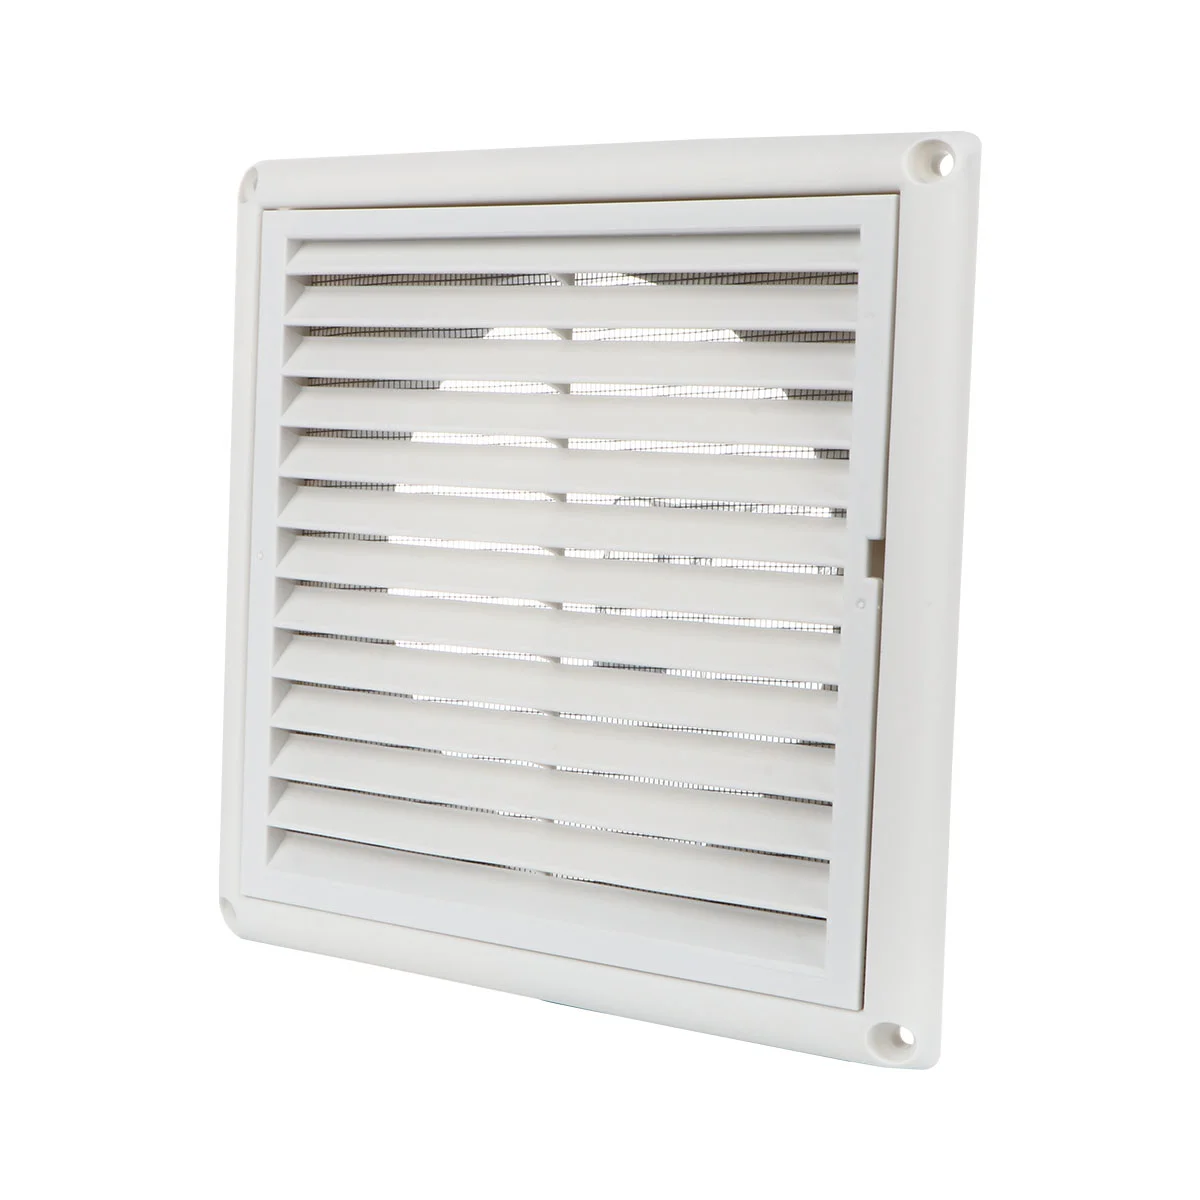 

1PC Air Vents Ventilation Grill- Mosquito Net Louver Exhaust Hood Grille for Office/ Bathroom/ Home ( White, 150mm )